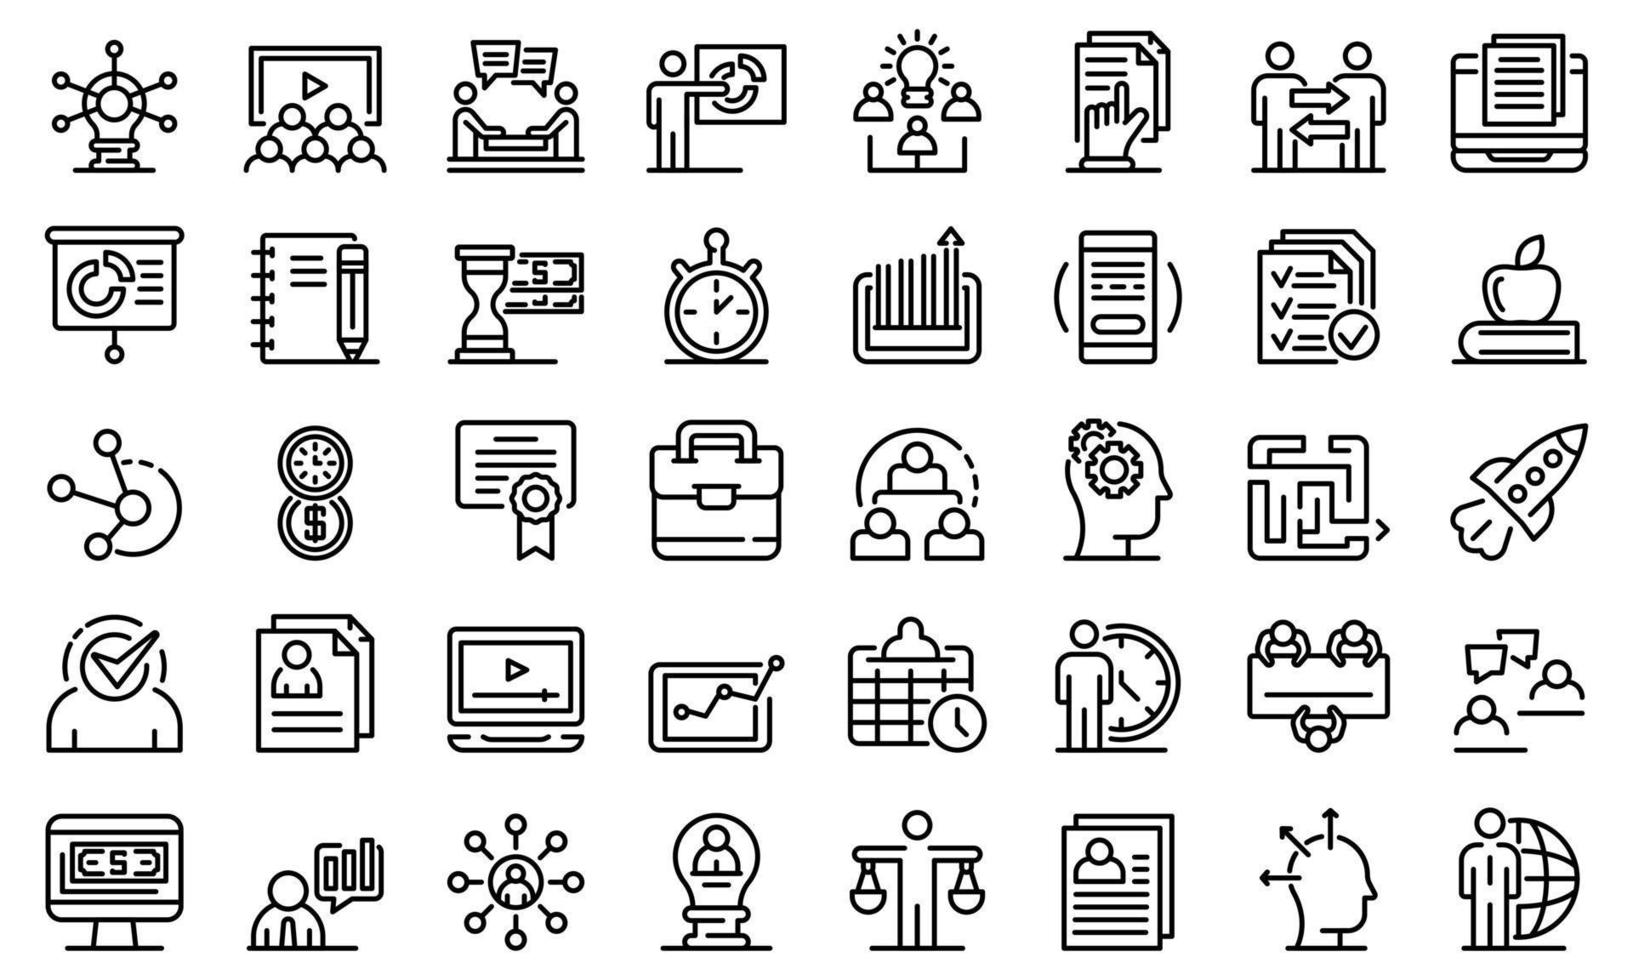 Business training icons set, outline style vector